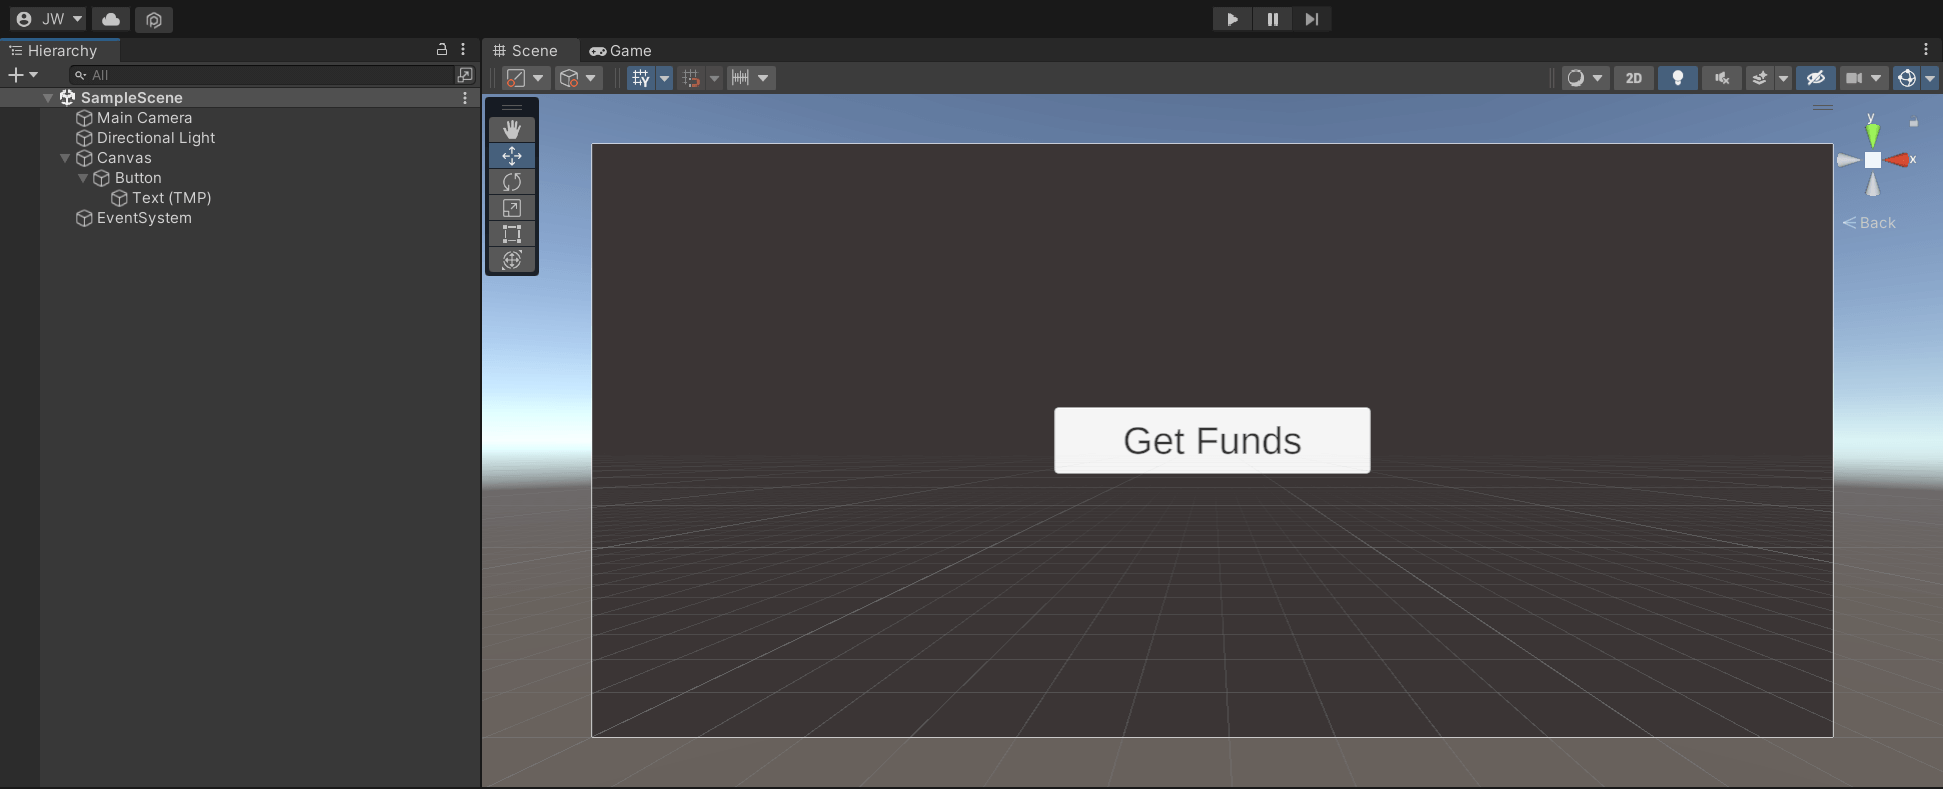 Create the Get Funds button